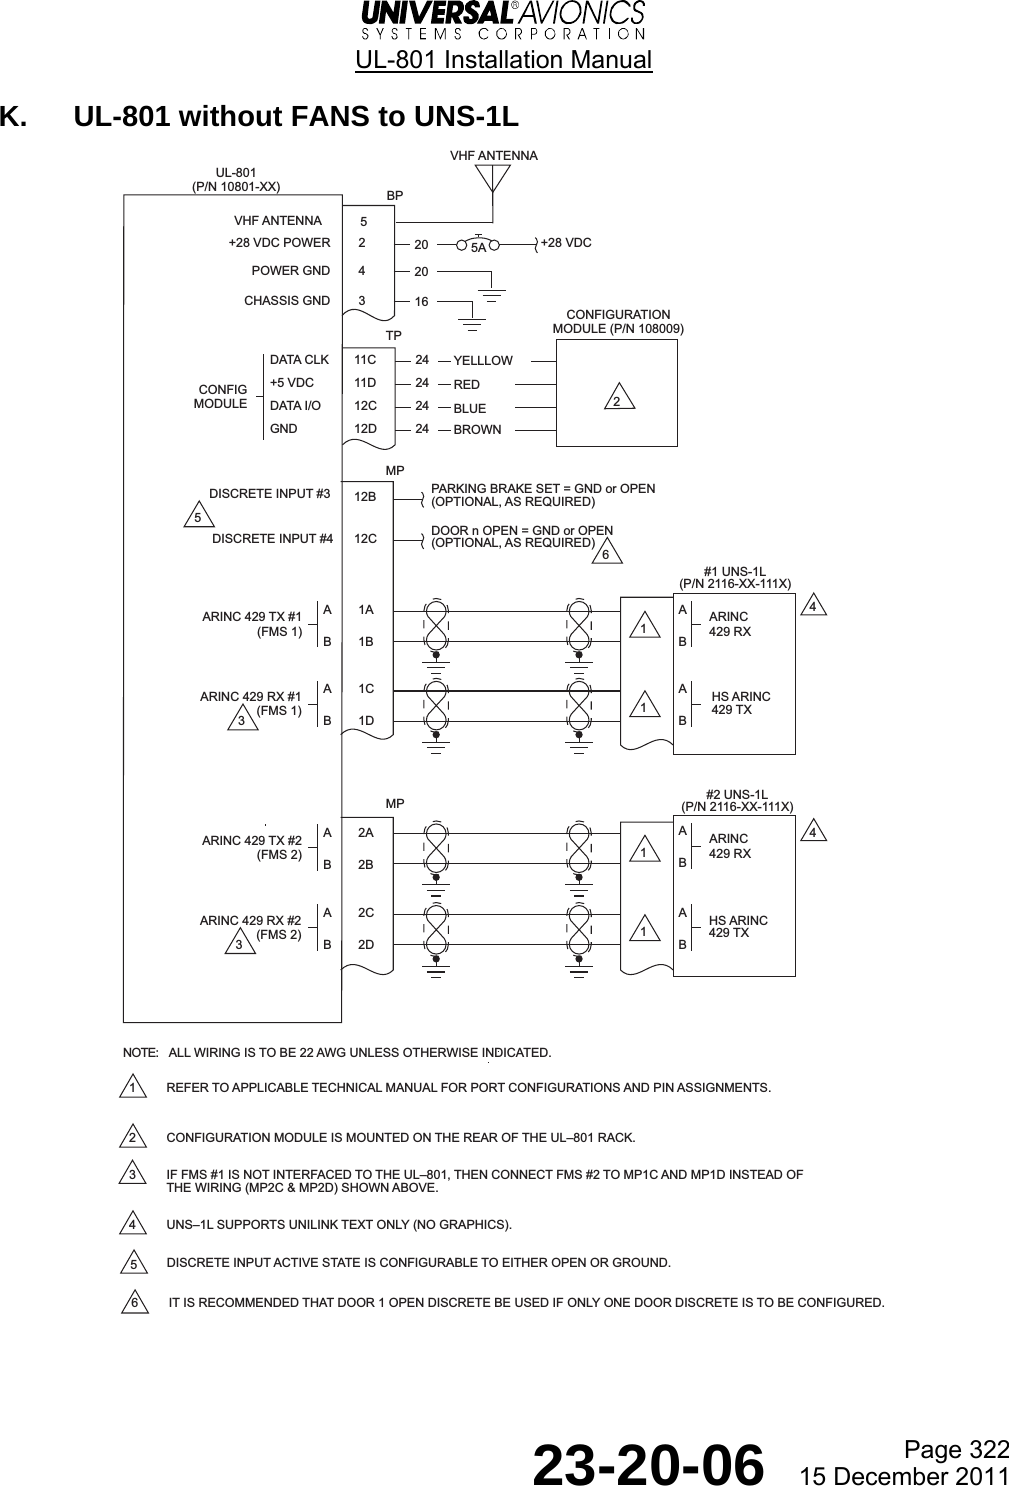  UL-801 Installation Manual  Page 322  23-20-06  15 December 2011 K.  UL-801 without FANS to UNS-1L     UL-801(P/N 10801-XX)A1AB1BARINC 429 TX #1(FMS 1)#1 UNS-1L(P/N 2116-XX-111X)BP2+28 VDC4+28 VDC POWERPOWER GNDCHASSIS GND 35ATP11CCONFIGURATIONMODULE (P/N 108009)2411D 2412C 2412D 24DATA CLK+5 VDCDATA I/OGNDCONFIGMODULEMP12B PARKING BRAKE SET = GND or OPEN(OPTIONAL, AS REQUIRED)DISCRETE INPUT #4 12C DOOR n OPEN = GND or OPEN(OPTIONAL, AS REQUIRED)ABARINC429 RXA1CB1DARINC 429 RX #1(FMS 1)ABHS ARINC429 TX#2 UNS-1L(P/N 2116-XX-111X)ABARINC429 RXA2CB2DARINC 429 RX #2(FMS 2)ABHS ARINC429 TXMP202016A2AB2BARINC 429 TX #2(FMS 2)DISCRETE INPUT #34411112YELLLOWREDBLUEBROWN33651 REFER TO APPLICABLE TECHNICAL MANUAL FOR PORT CONFIGURATIONS AND PIN ASSIGNMENTS.2 CONFIGURATION MODULE IS MOUNTED ON THE REAR OF THE UL801 RACK.3 IF FMS #1 IS NOT INTERFACED TO THE UL801, THEN CONNECT FMS #2 TO MP1C AND MP1D INSTEAD OFTHE WIRING (MP2C &amp; MP2D) SHOWN ABOVE.4 UNS1L SUPPORTS UNILINK TEXT ONLY (NO GRAPHICS).DISCRETE INPUT ACTIVE STATE IS CONFIGURABLE TO EITHER OPEN OR GROUND.IT IS RECOMMENDED THAT DOOR 1 OPEN DISCRETE BE USED IF ONLY ONE DOOR DISCRETE IS TO BE CONFIGURED.56ALL WIRING IS TO BE 22 AWG UNLESS OTHERWISE INDICATED.NOTE:VHF ANTENNA5VHF ANTENNA